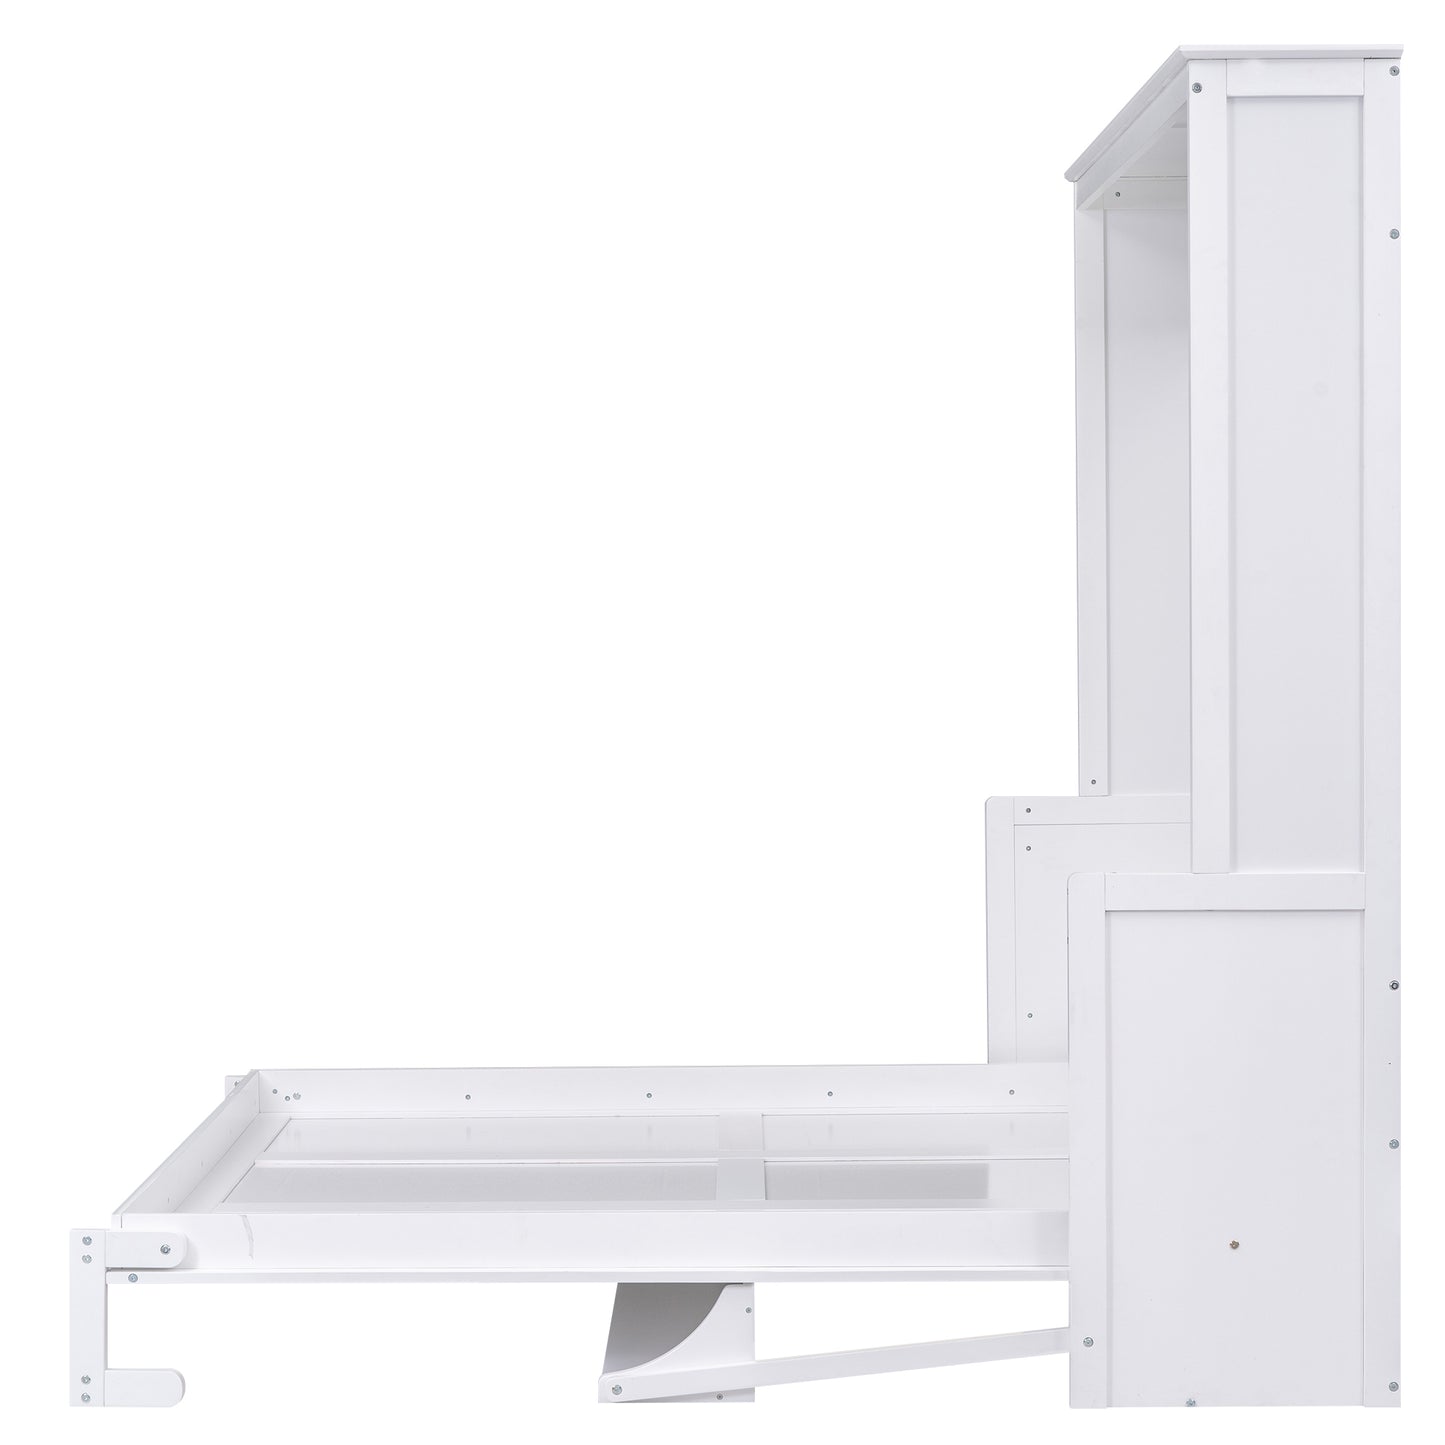 Queen Size Murphy Bed with a Shelf, White